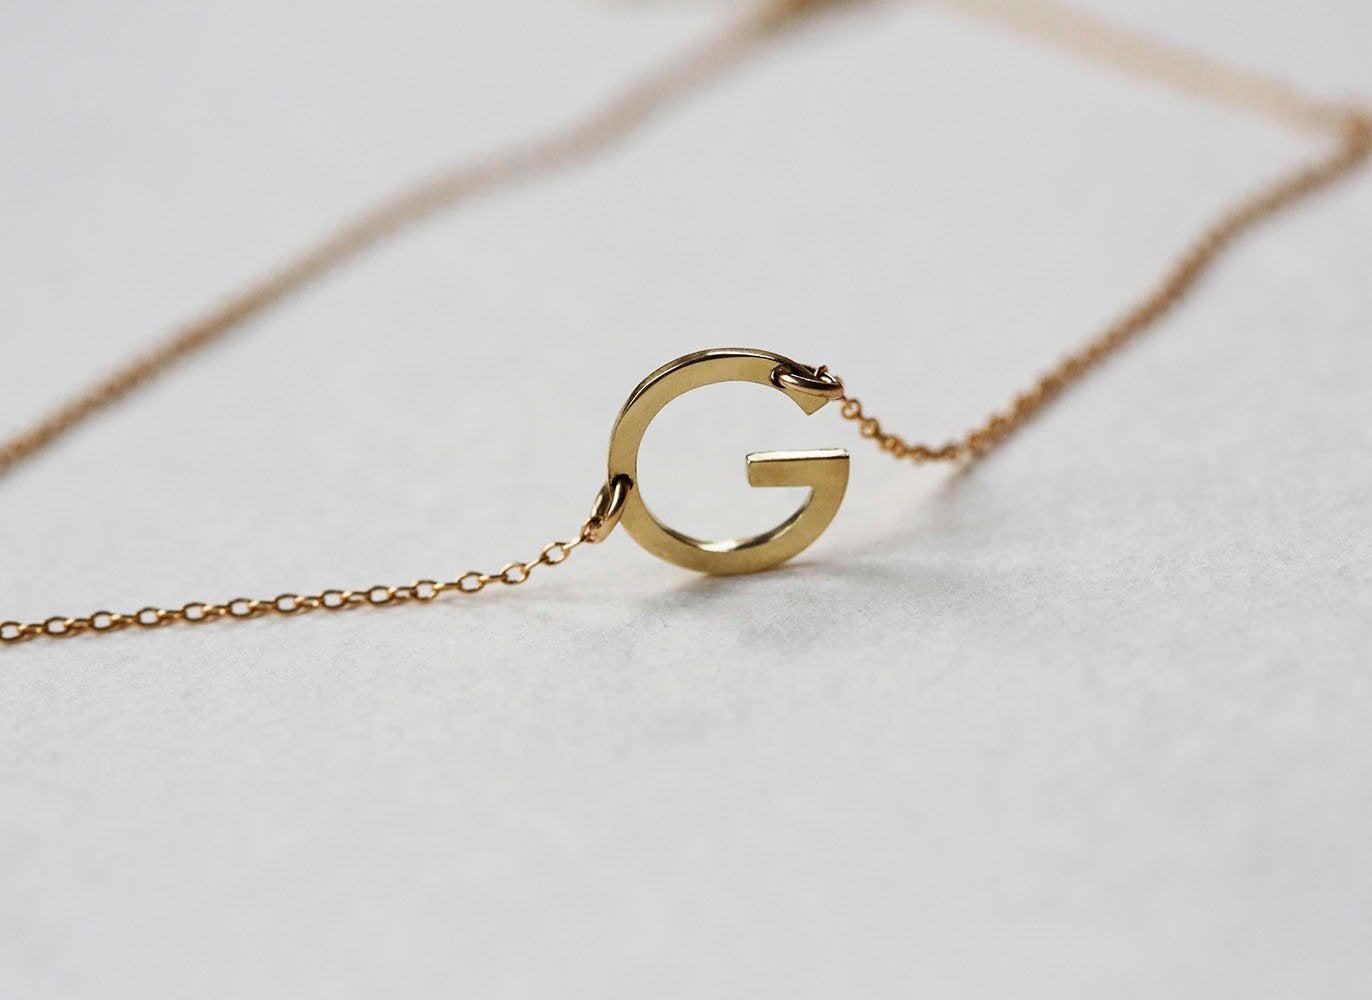 Gold chain necklace with personalized small initial letter